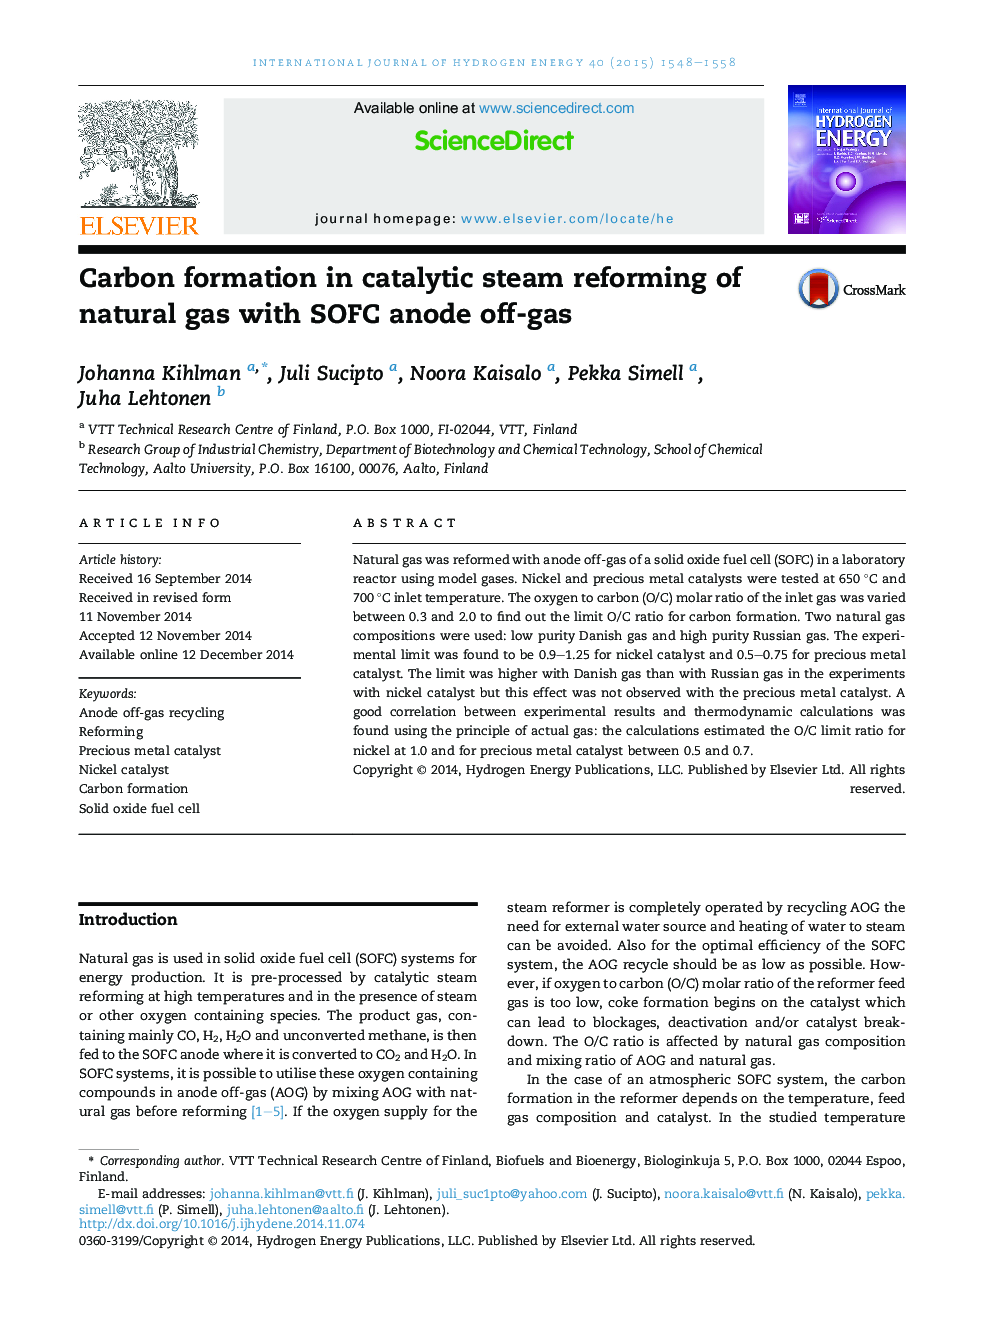 Carbon formation in catalytic steam reforming of natural gas with SOFC anode off-gas